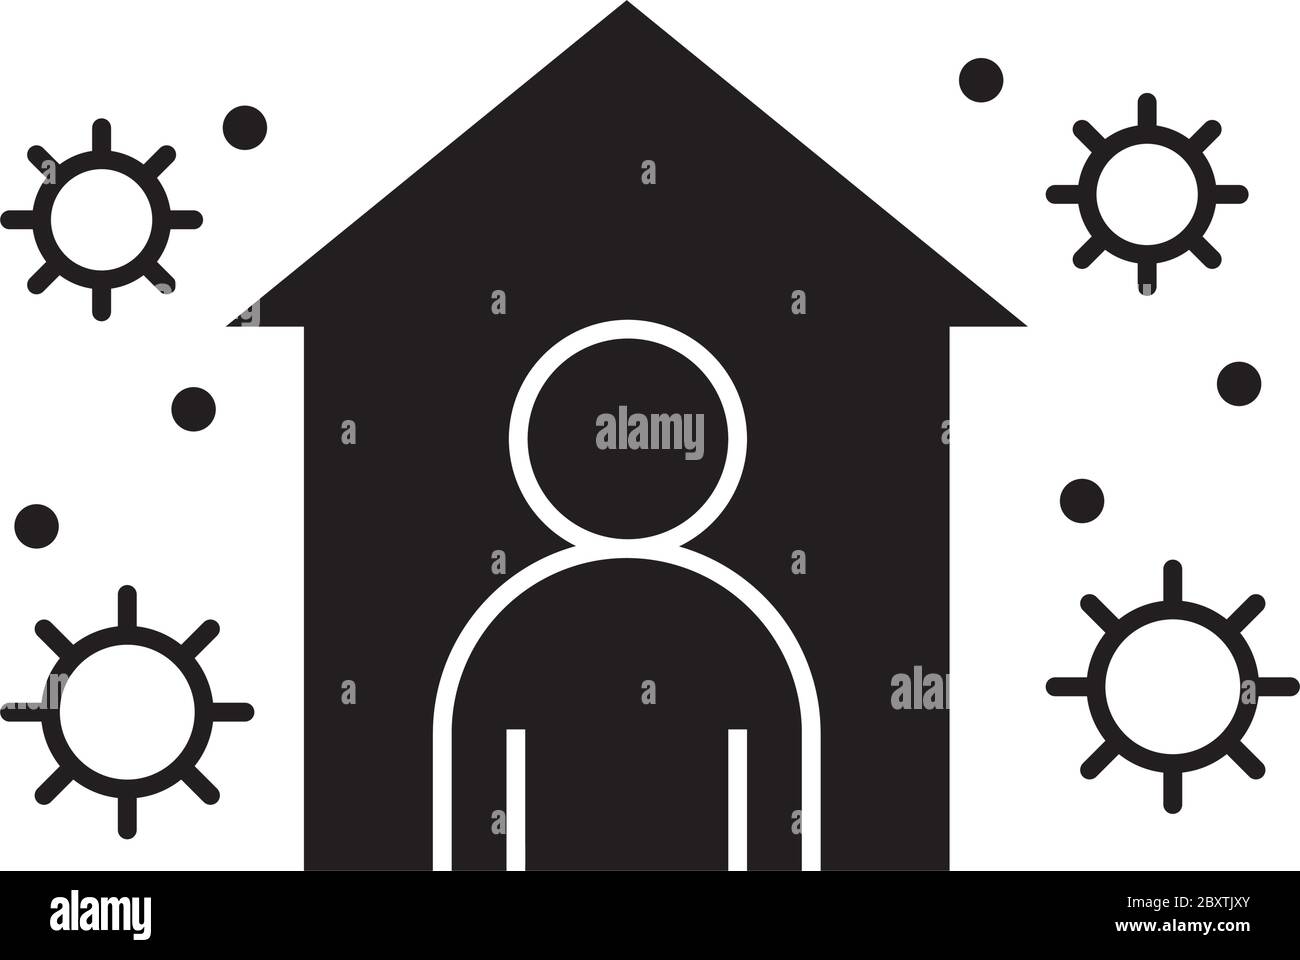 covid 19 coronavirus social distancing, stay in the house to prevent virus infection vector illustration silhouette style icon Stock Vector